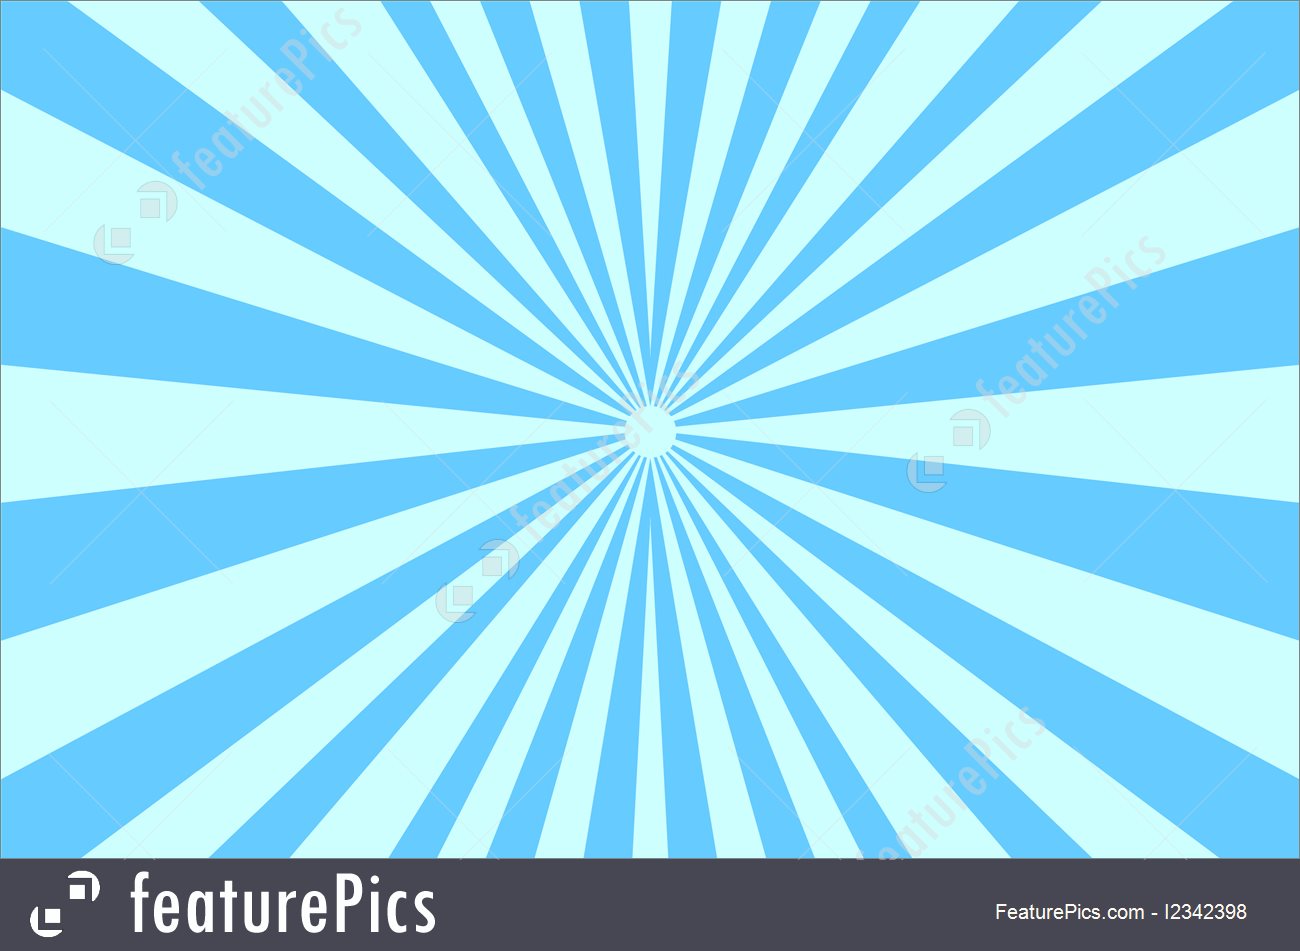 Sky Blue Background With Beams Stock Illustration I2342398 At